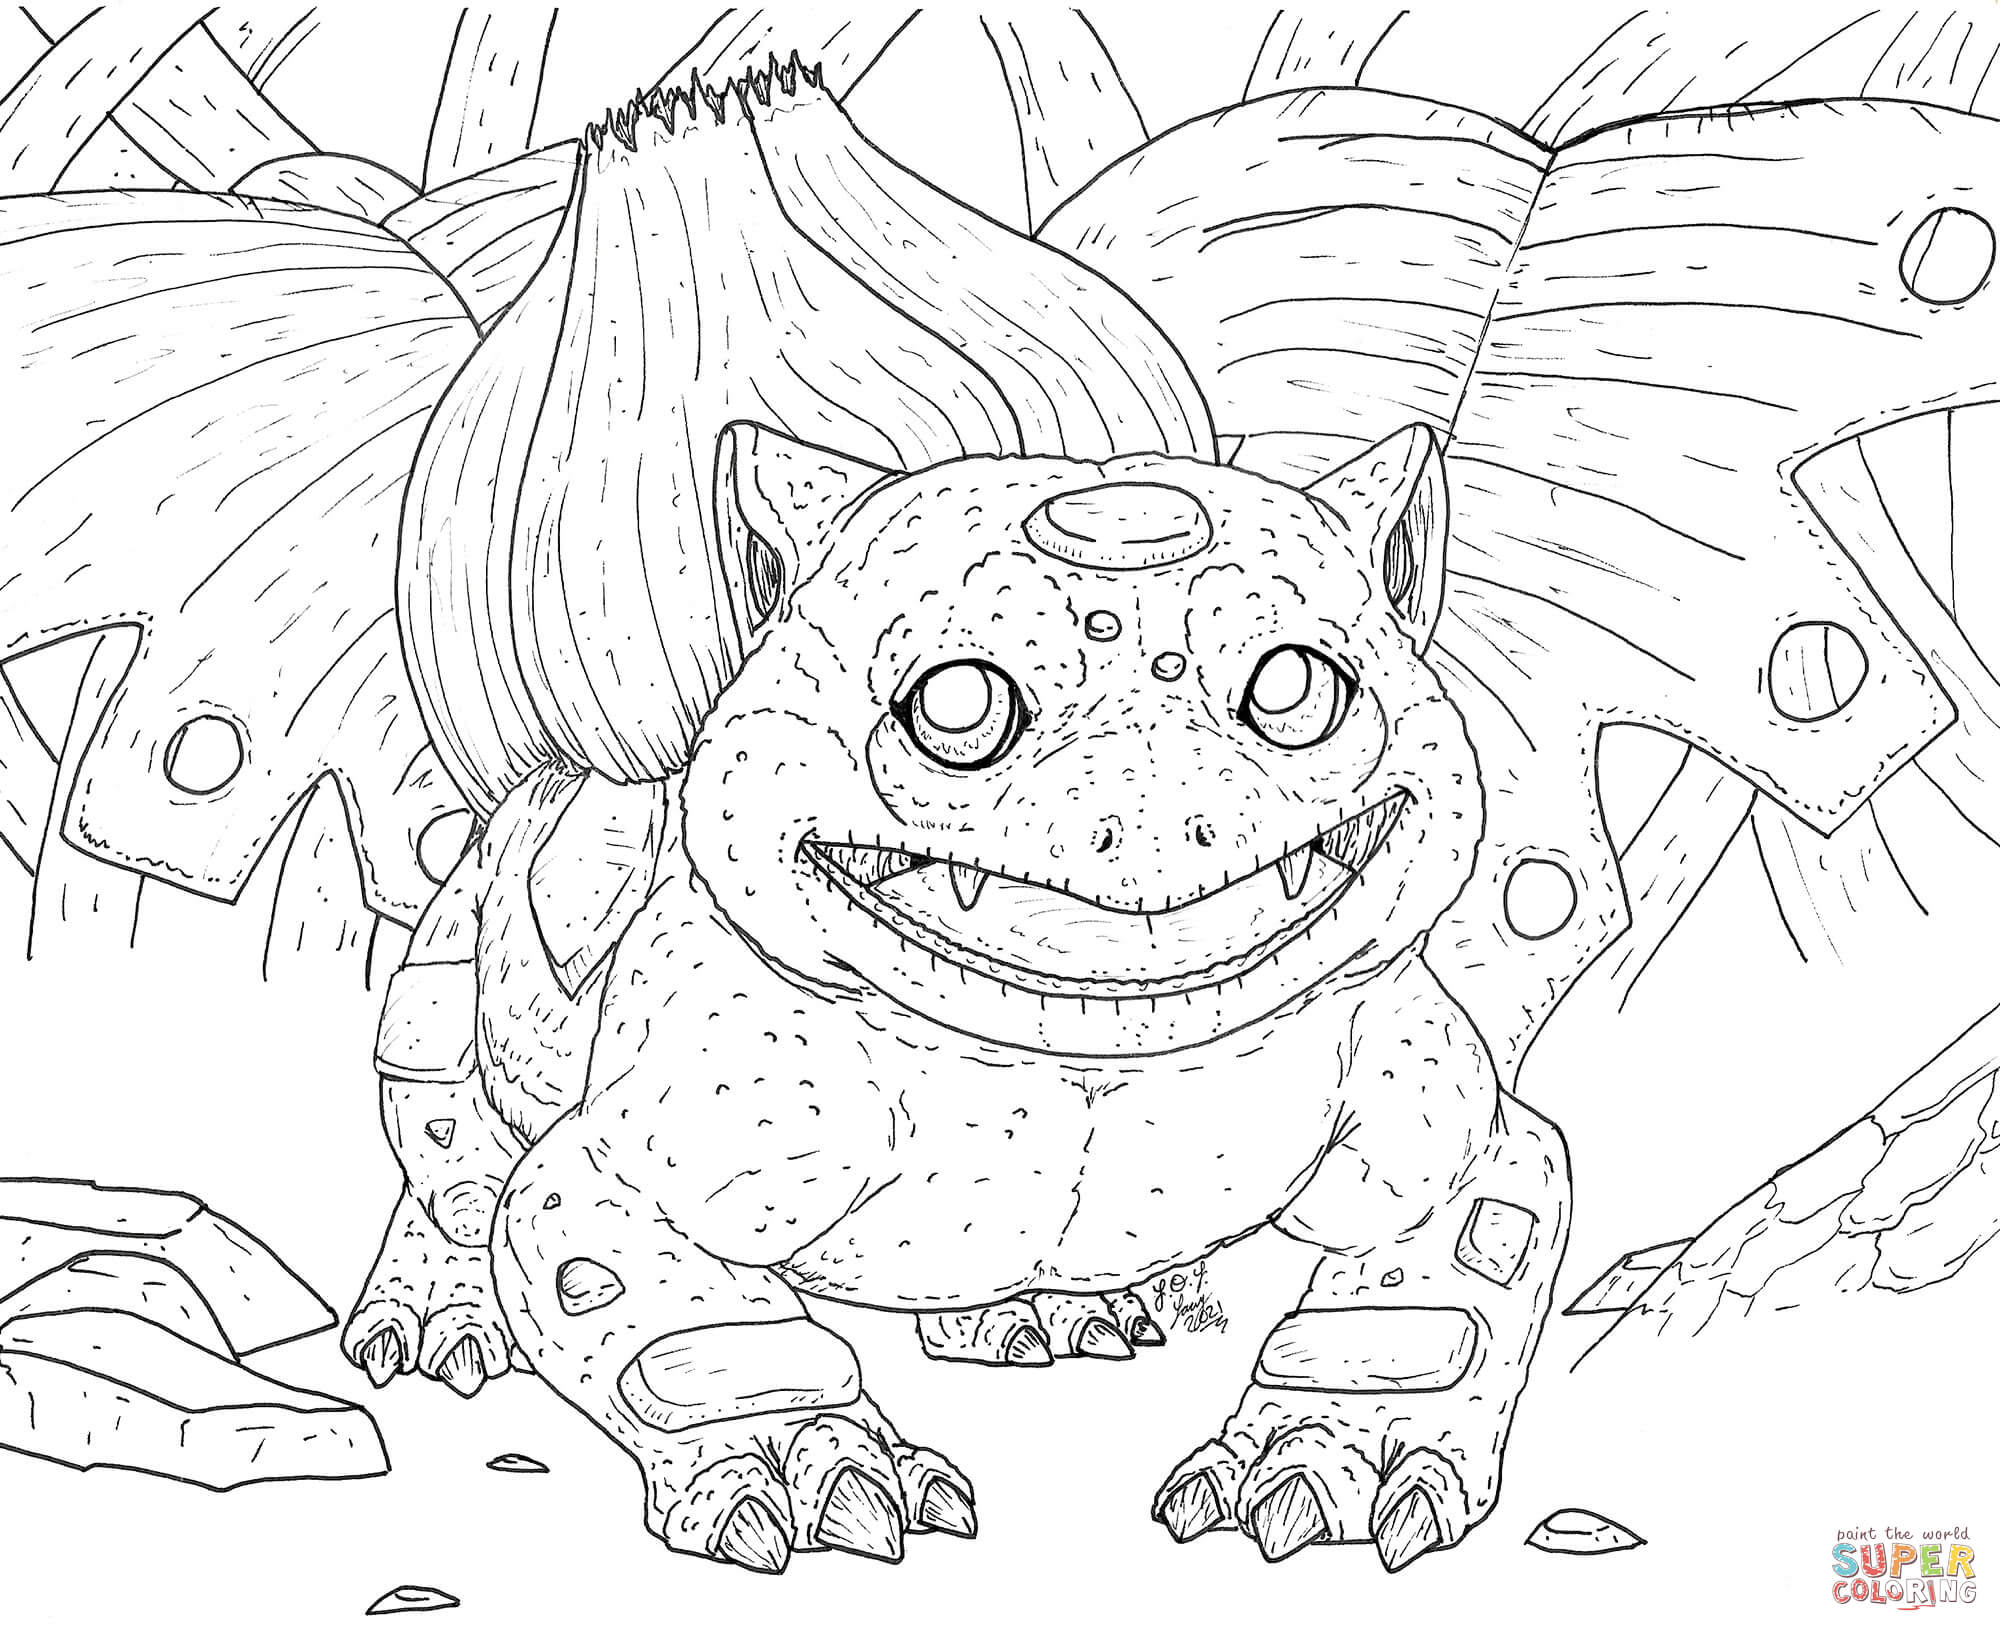 Bulbasaur coloring page free printable coloring pages